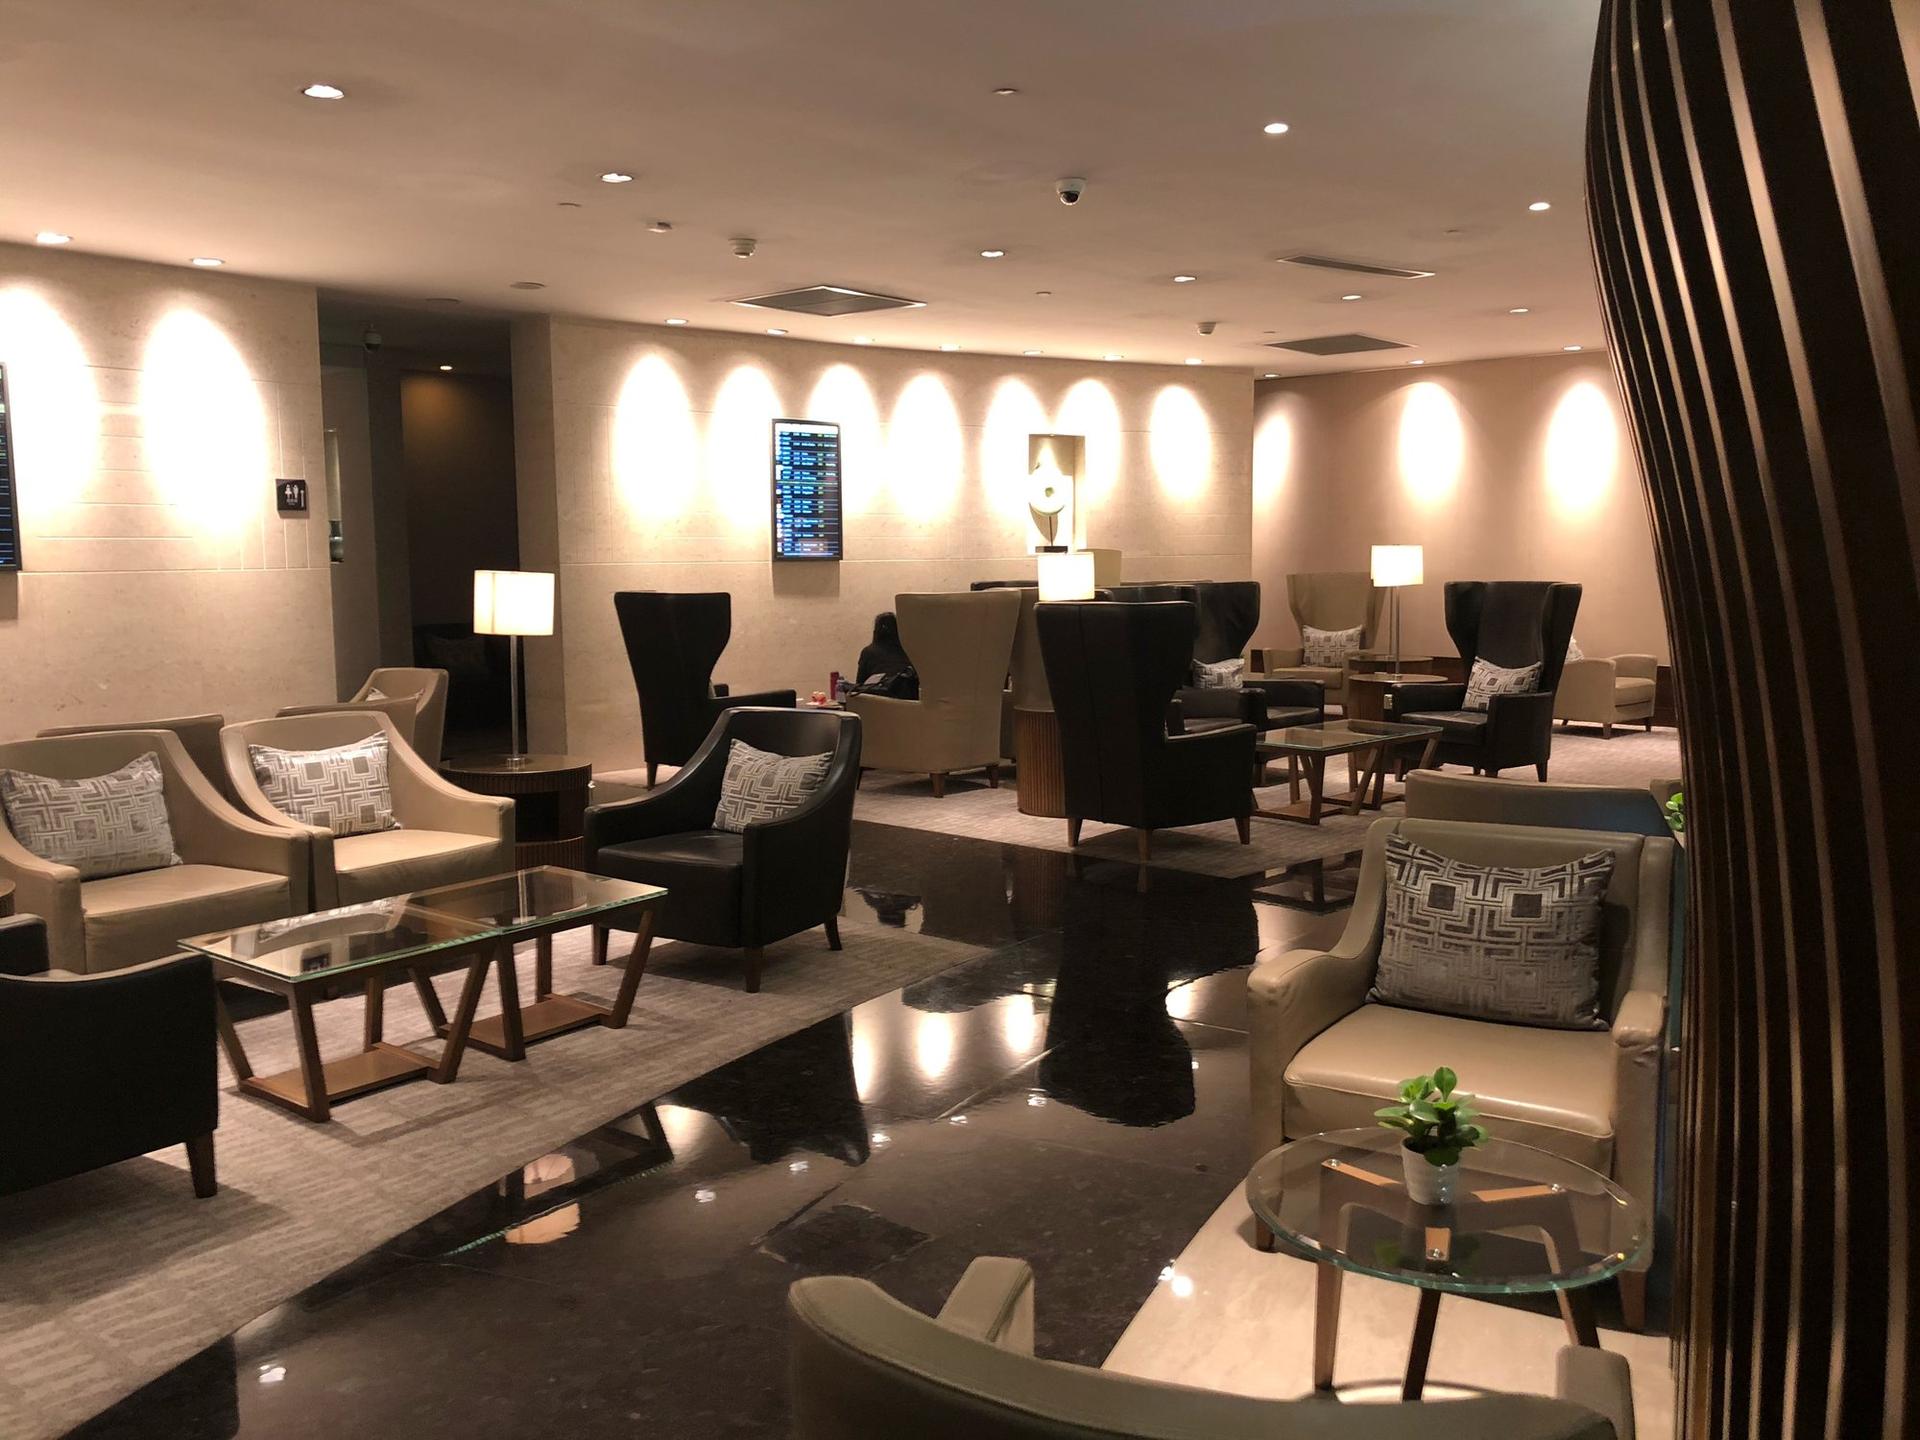 No. 71 Air China First Class Lounge image 6 of 10